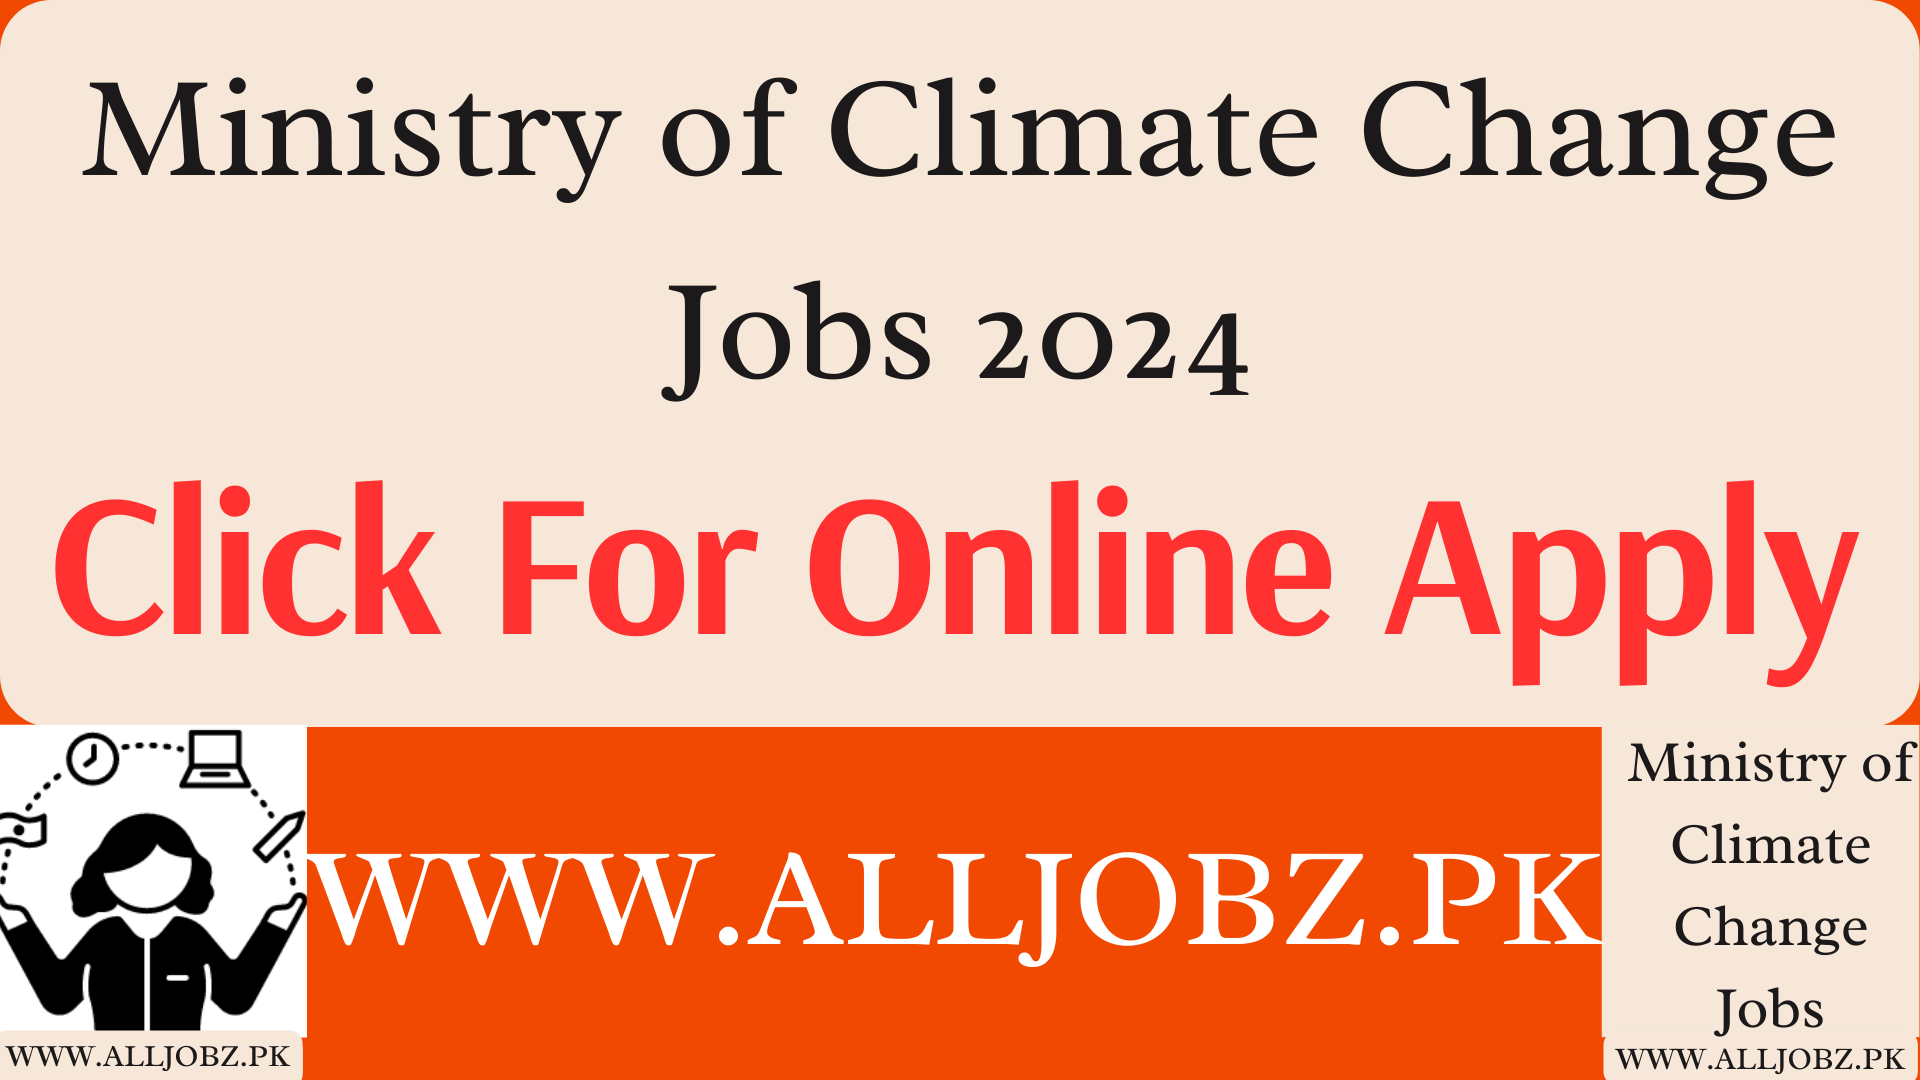 Ministry Of Climate Change Jobs 2024 Online Apply, Ministry Of Climate Change Jobs 2024 Online Apply Pakistan, Ministry Of Climate Change Jobs 2024 Online Apply Karachi, Ministry Of Climate Change Jobs 2024 Online Apply Date, Ministry Of Climate Change Jobs Online Apply, Ministry Of Climate Jobs 2024, Ministry Of Climate Change Contact Number, Ministry Of Climate Change And Environmental Coordination, Ministry Of Climate Change Islamabad Address.